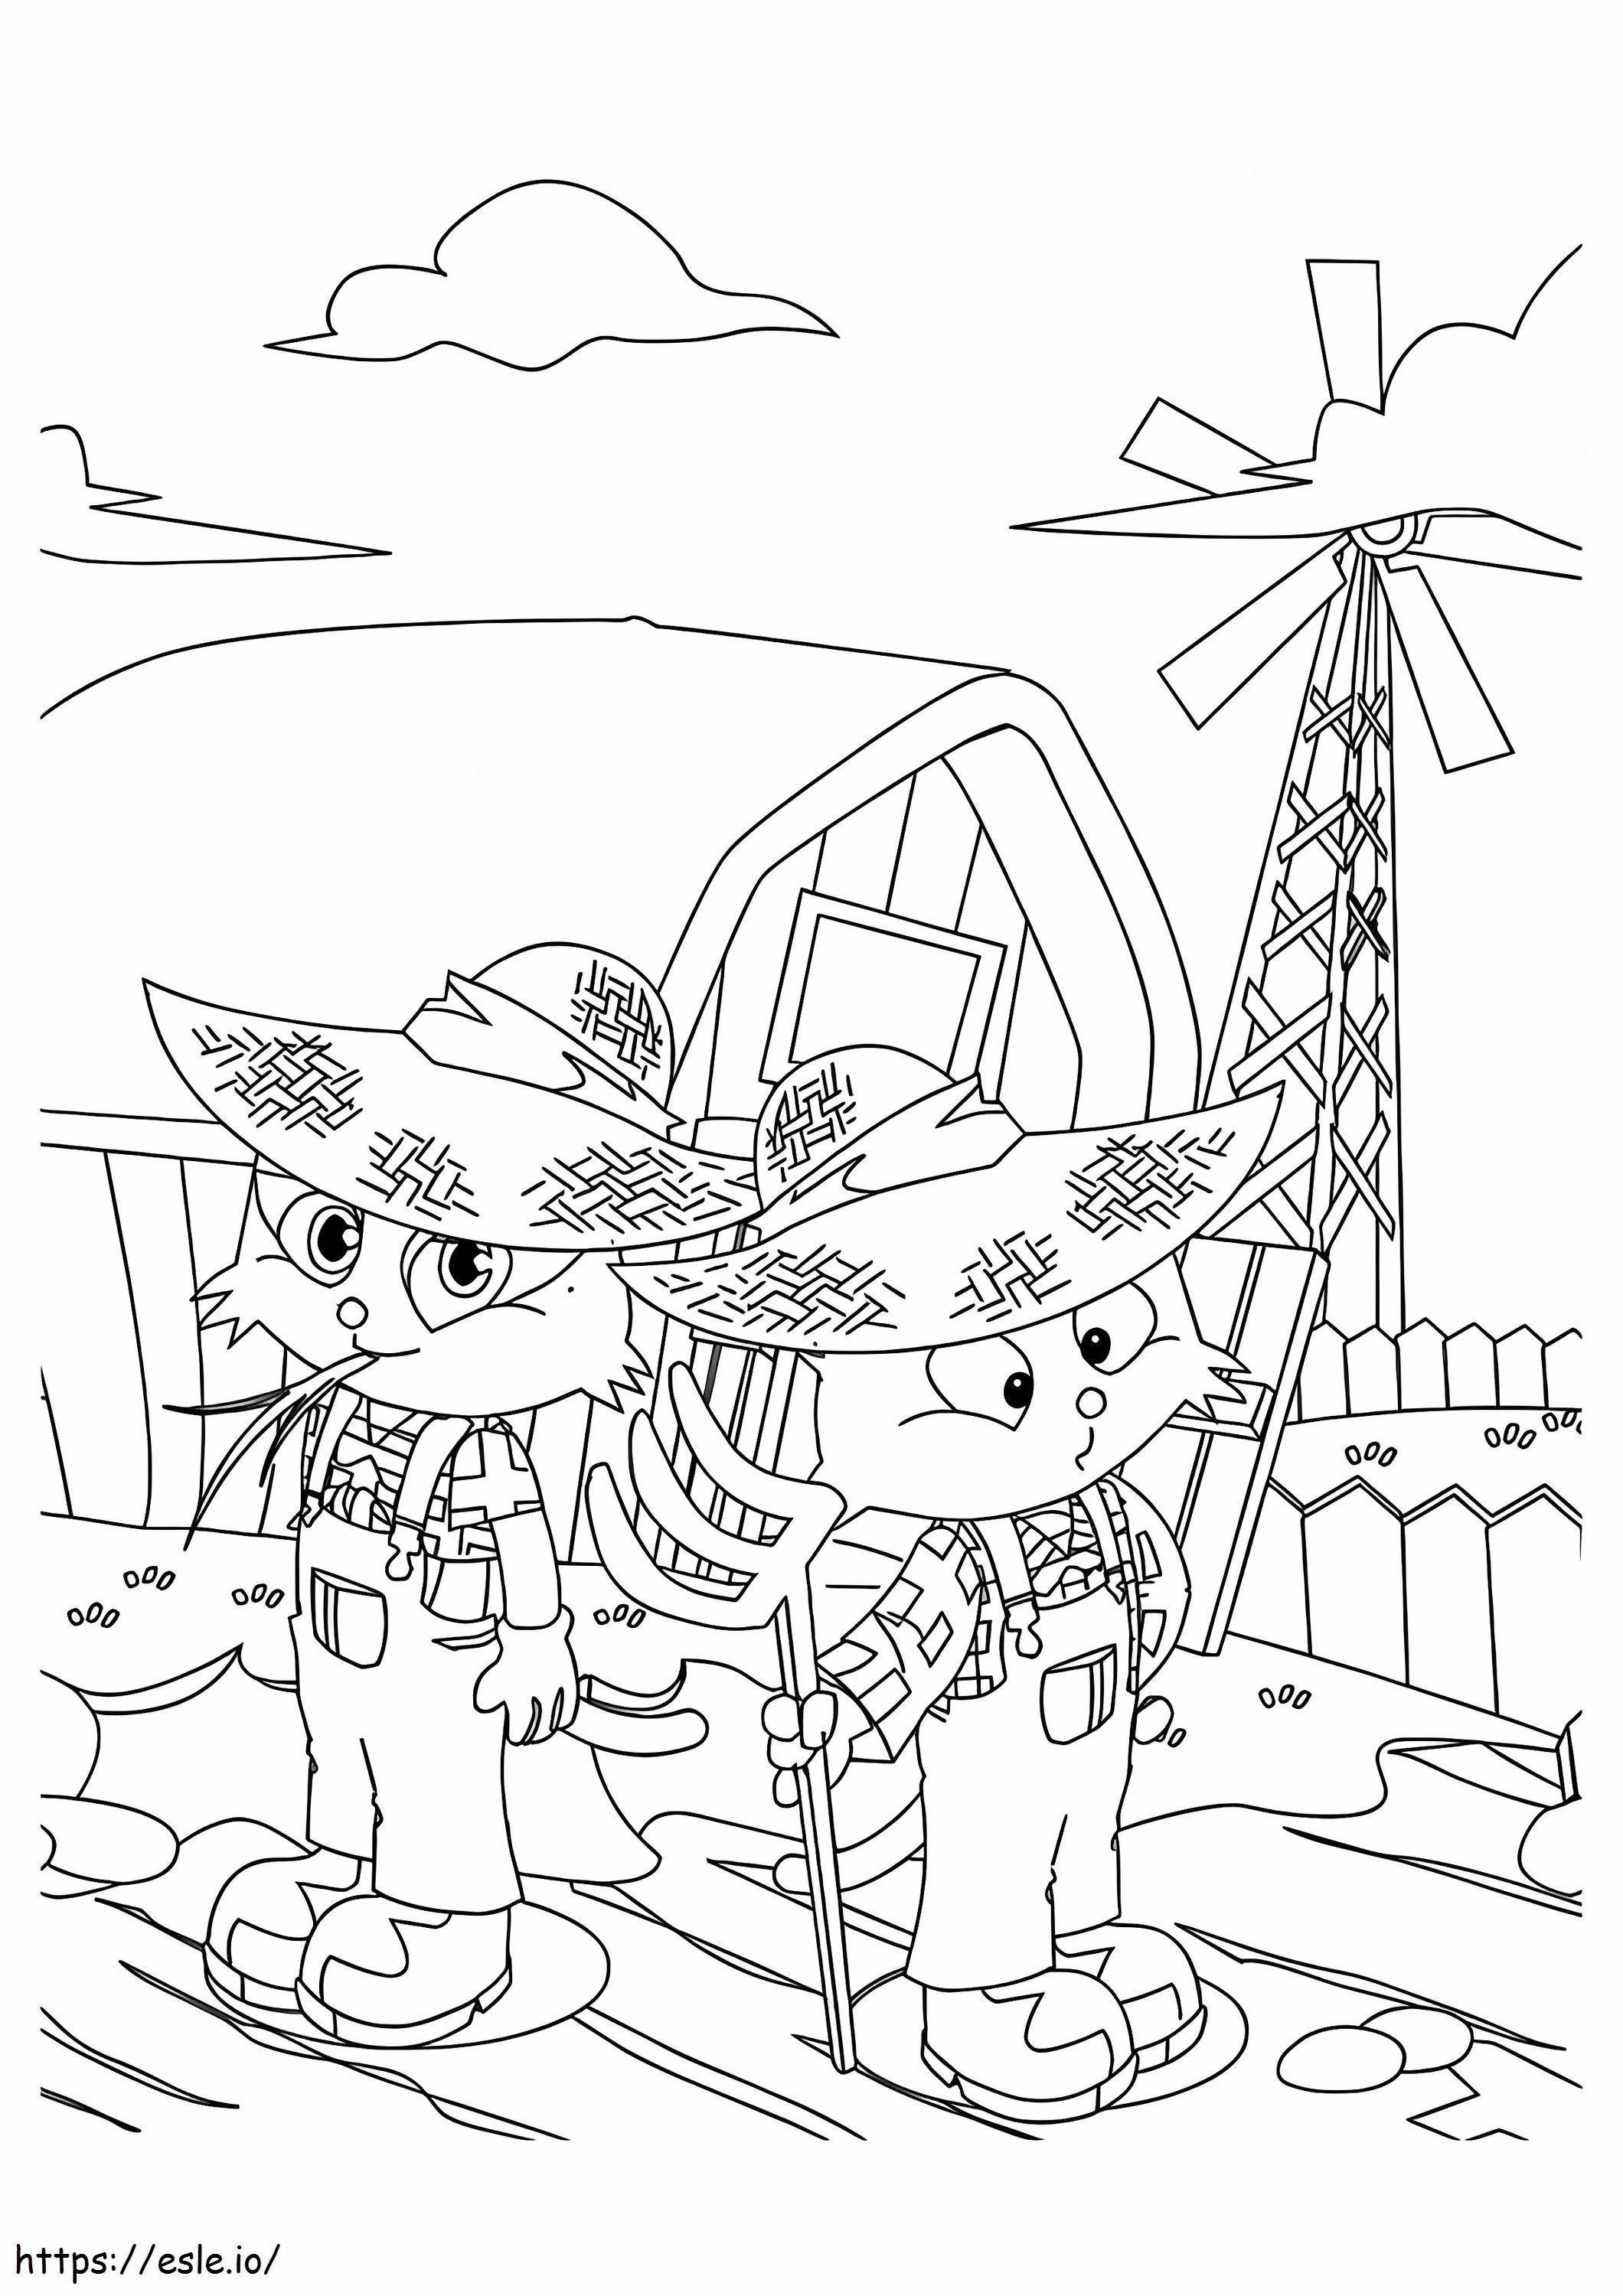 1530667609 The Two Kitties At Their Farm A4 coloring page